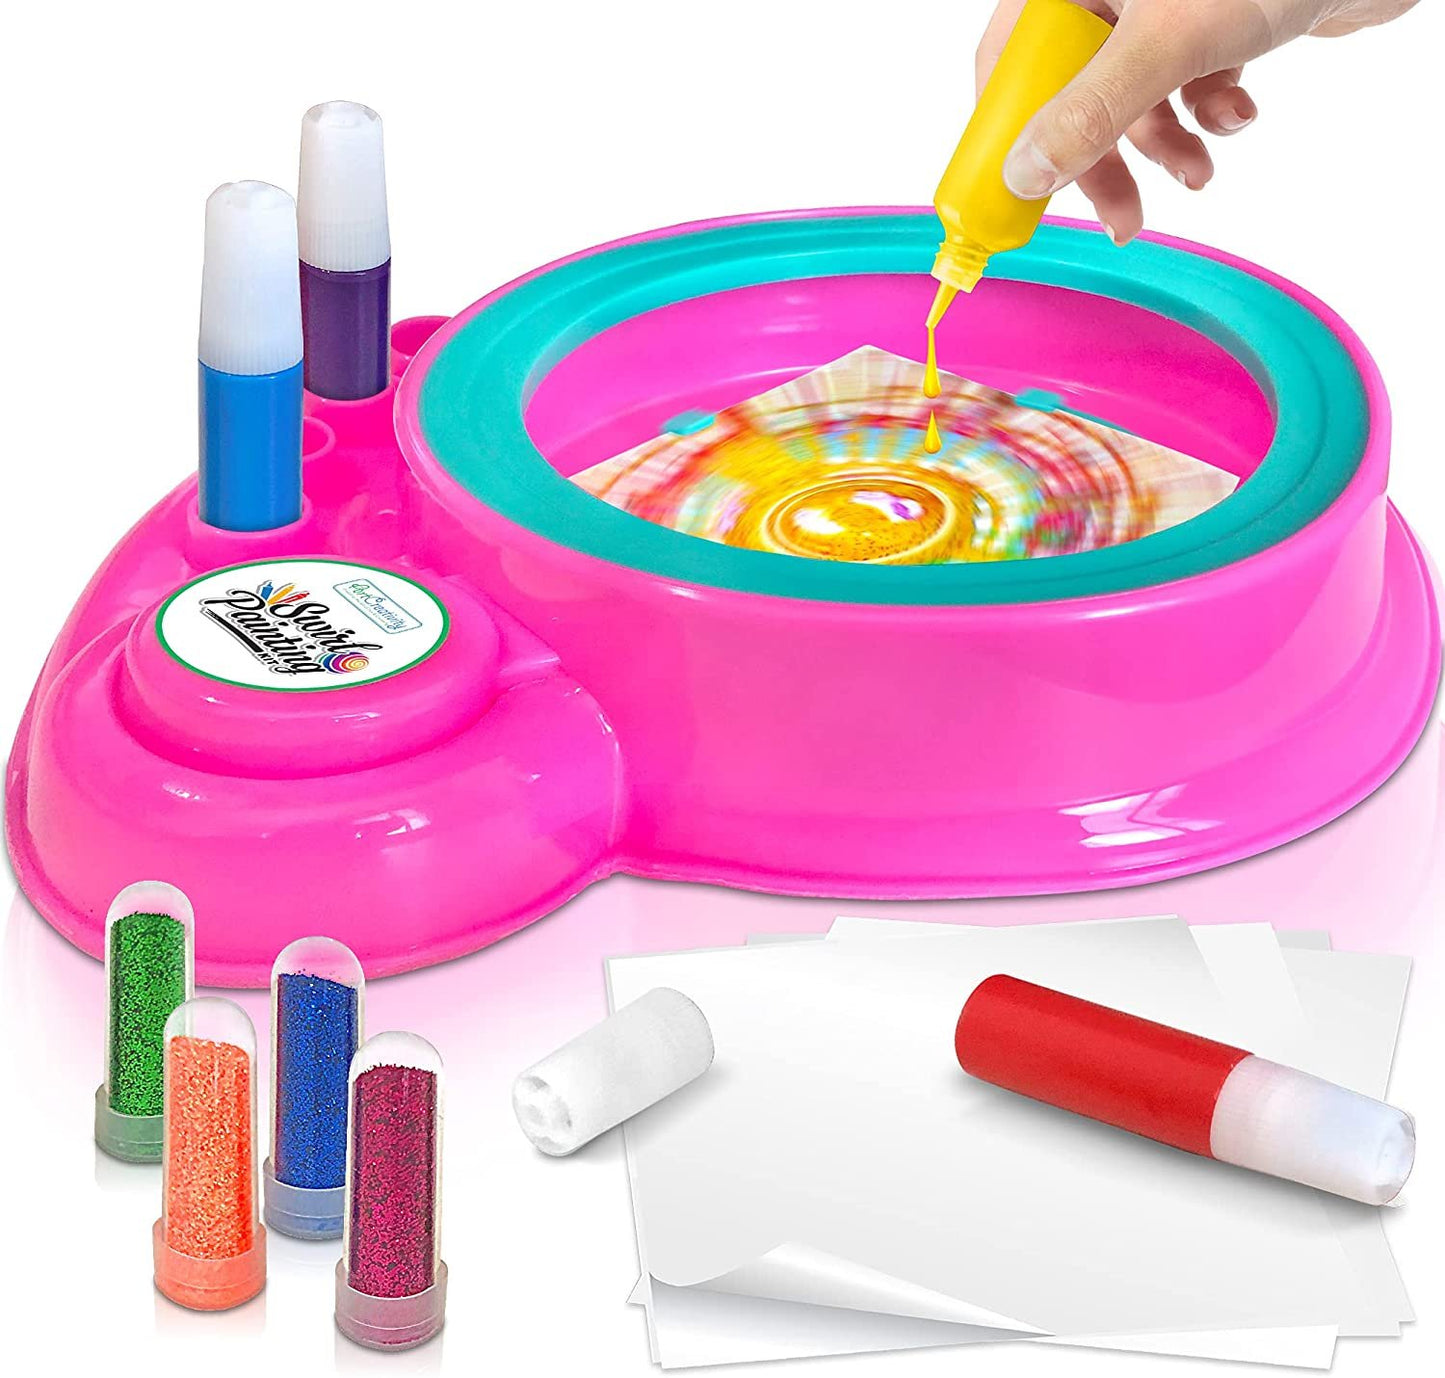 ArtCreativity Swirl Painting Kit for Kids, Friction Powered Spin Art Machine, 21 Piece Set, Includes Paint, Glitter, Paper, Spinning Wheel, Engaging Arts & Crafts Activities, No Batteries Required